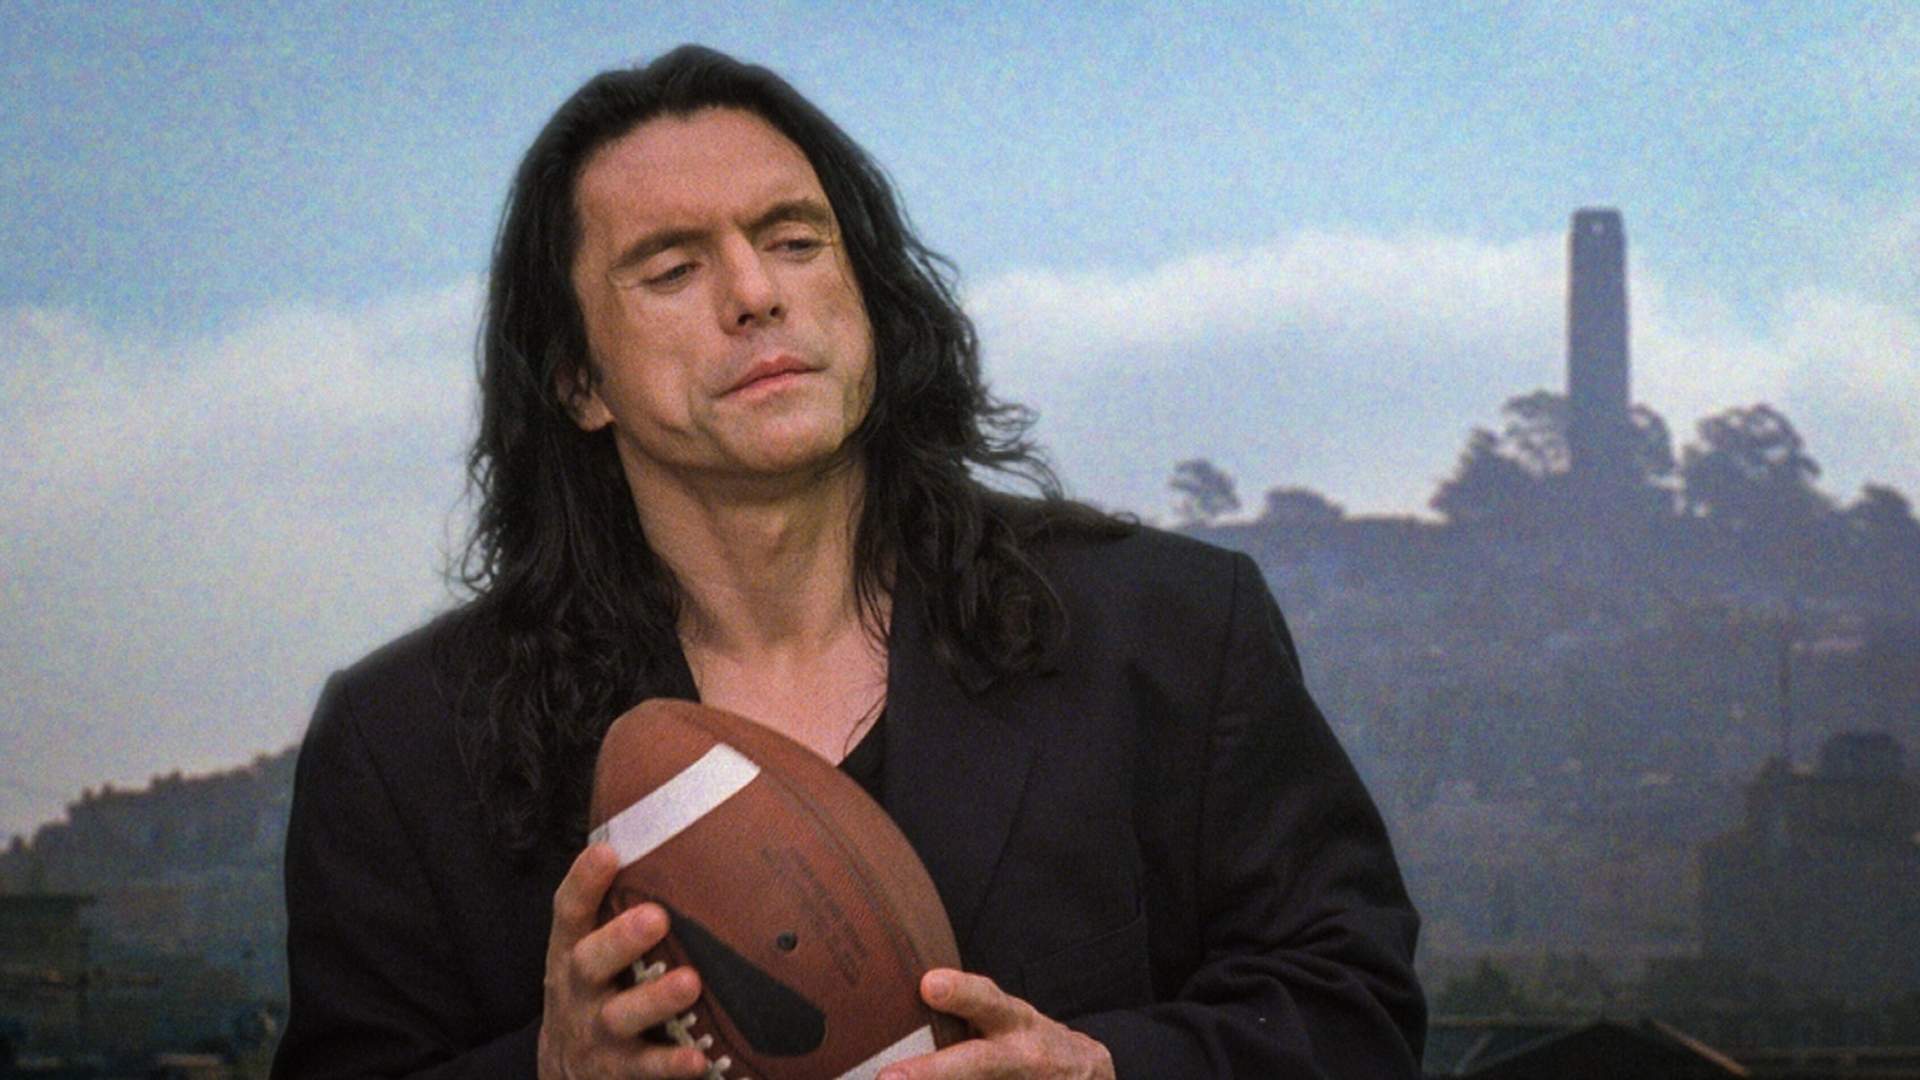 You Can Now Watch 'The Room' in High-Definition (and for Free) Thanks to Tommy Wiseau